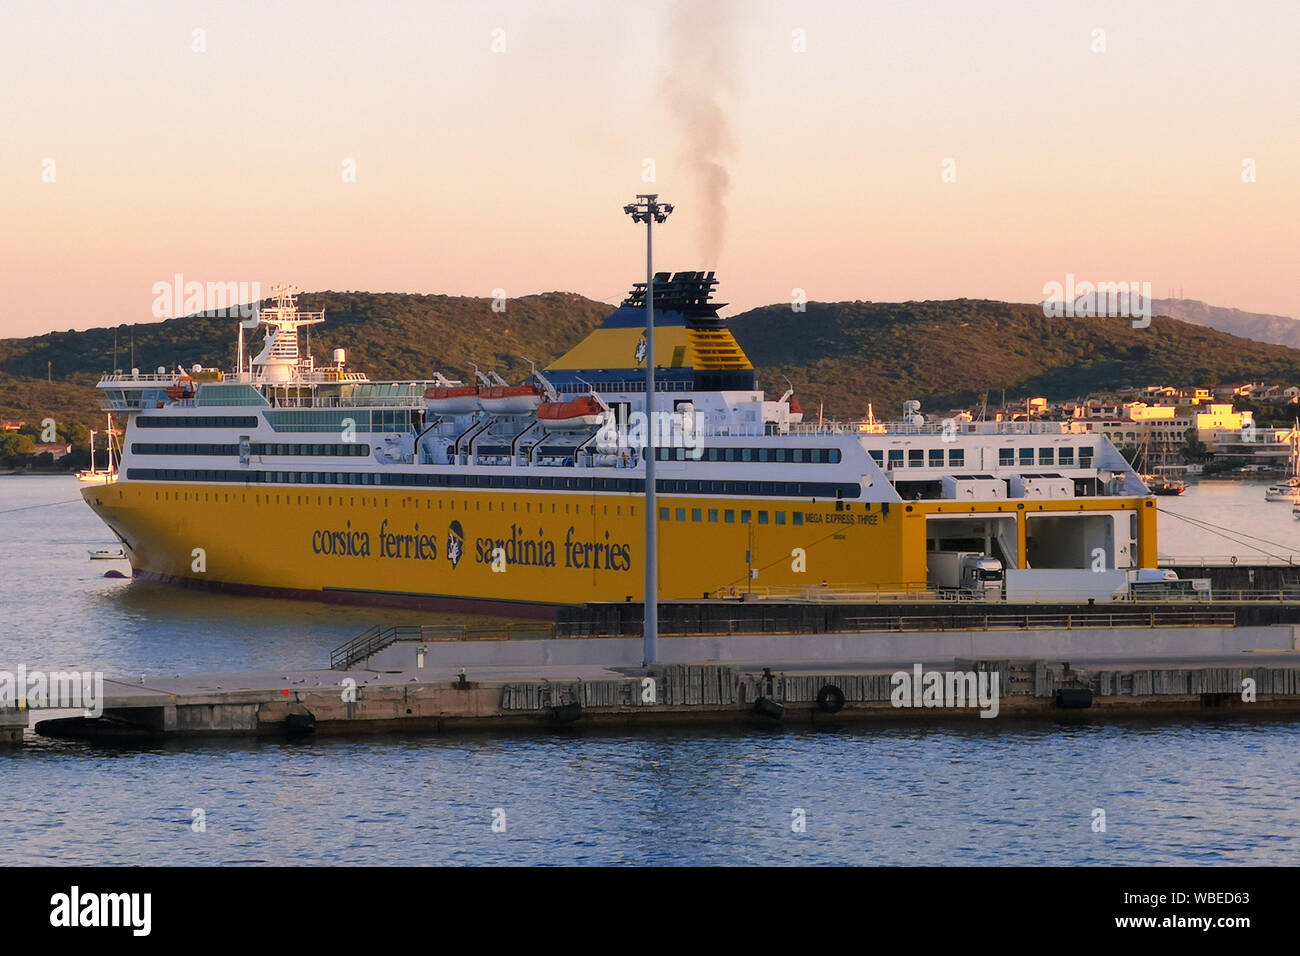 Livorno, Italy - August 3, 2019: Yellow ferry carrying passengers and means of transport connecting Italy with the island of Sardinia. Stock Photo